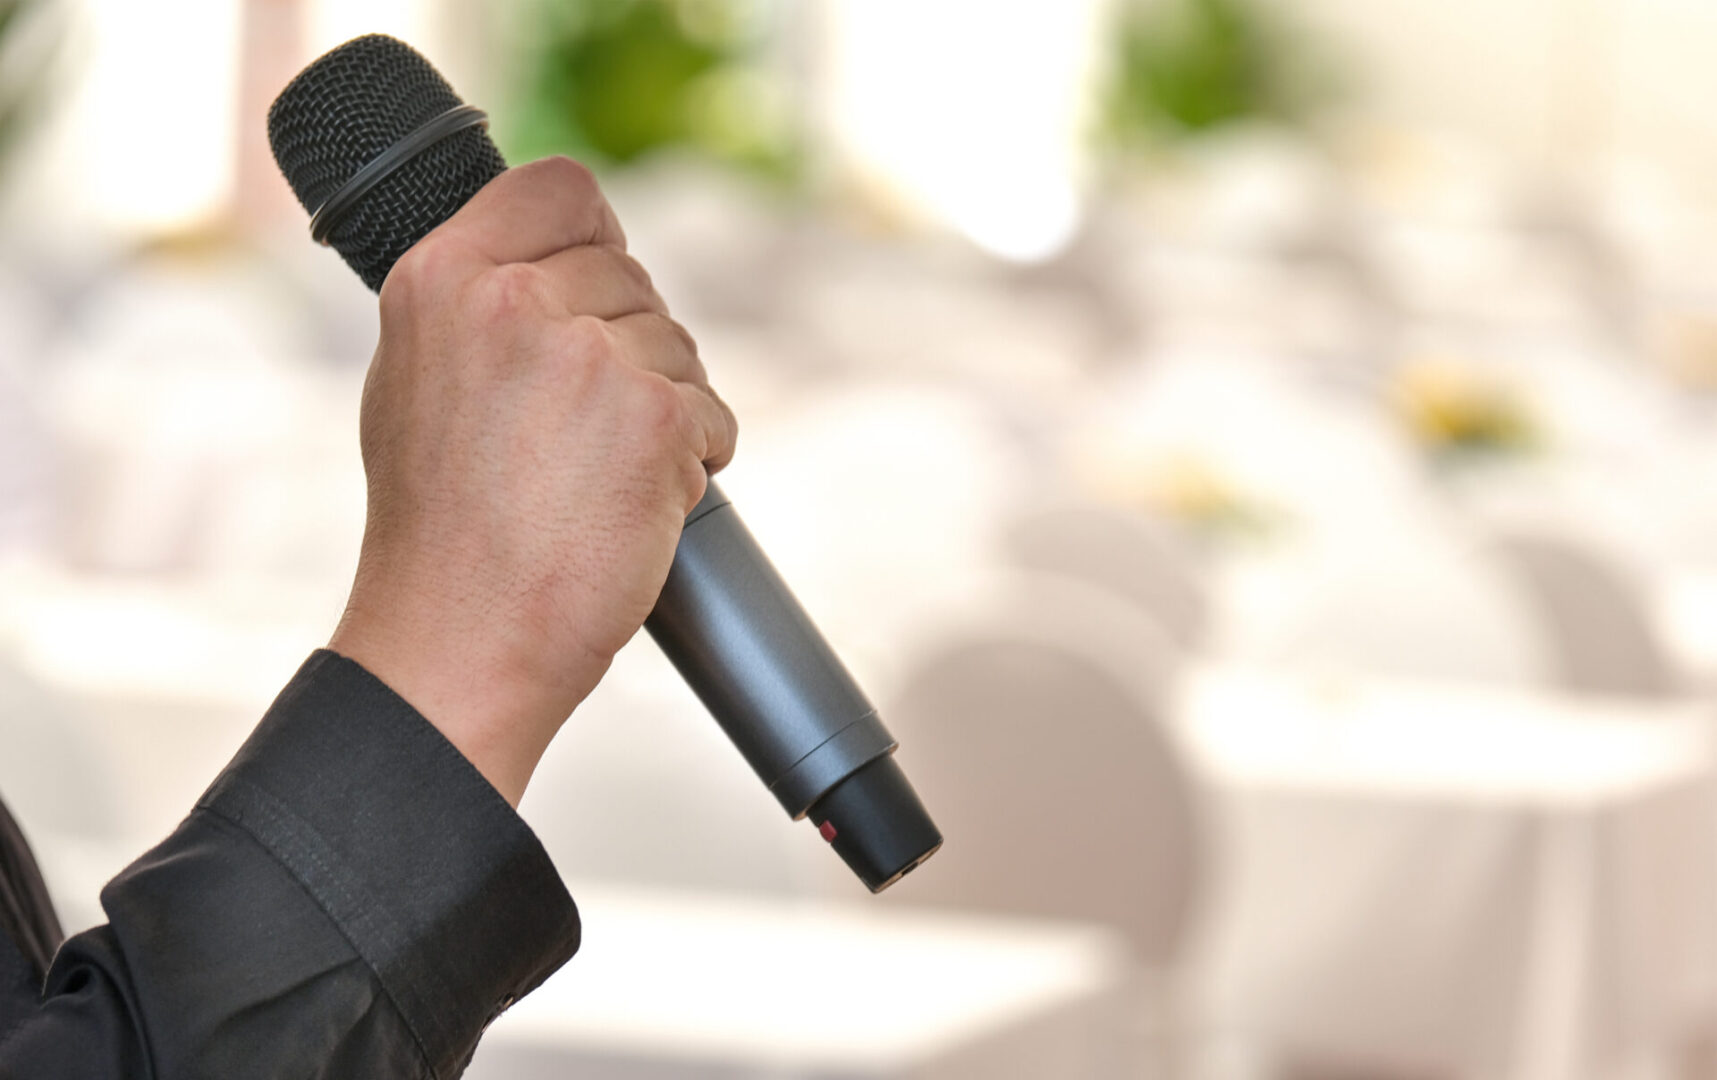 Man holding a black microphone during an event in a decorated banquet hall or ballroom